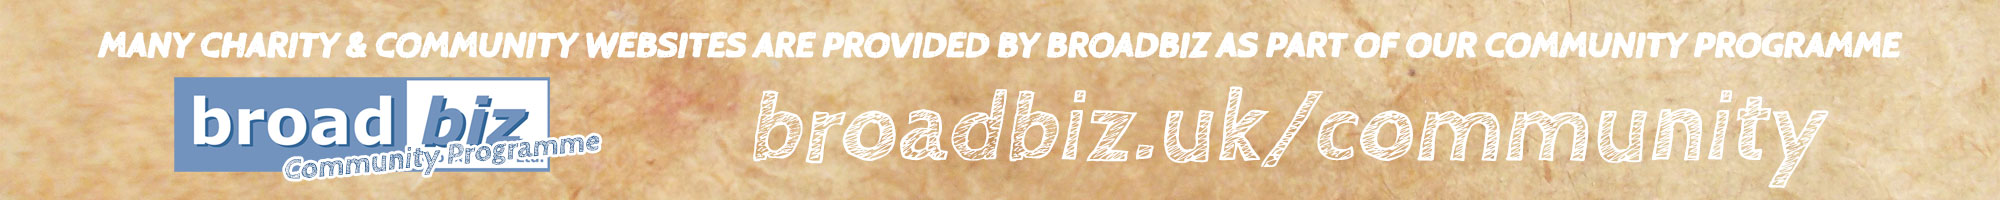 Many charity & community websites are provided by Broadbiz as part of our Community Programme